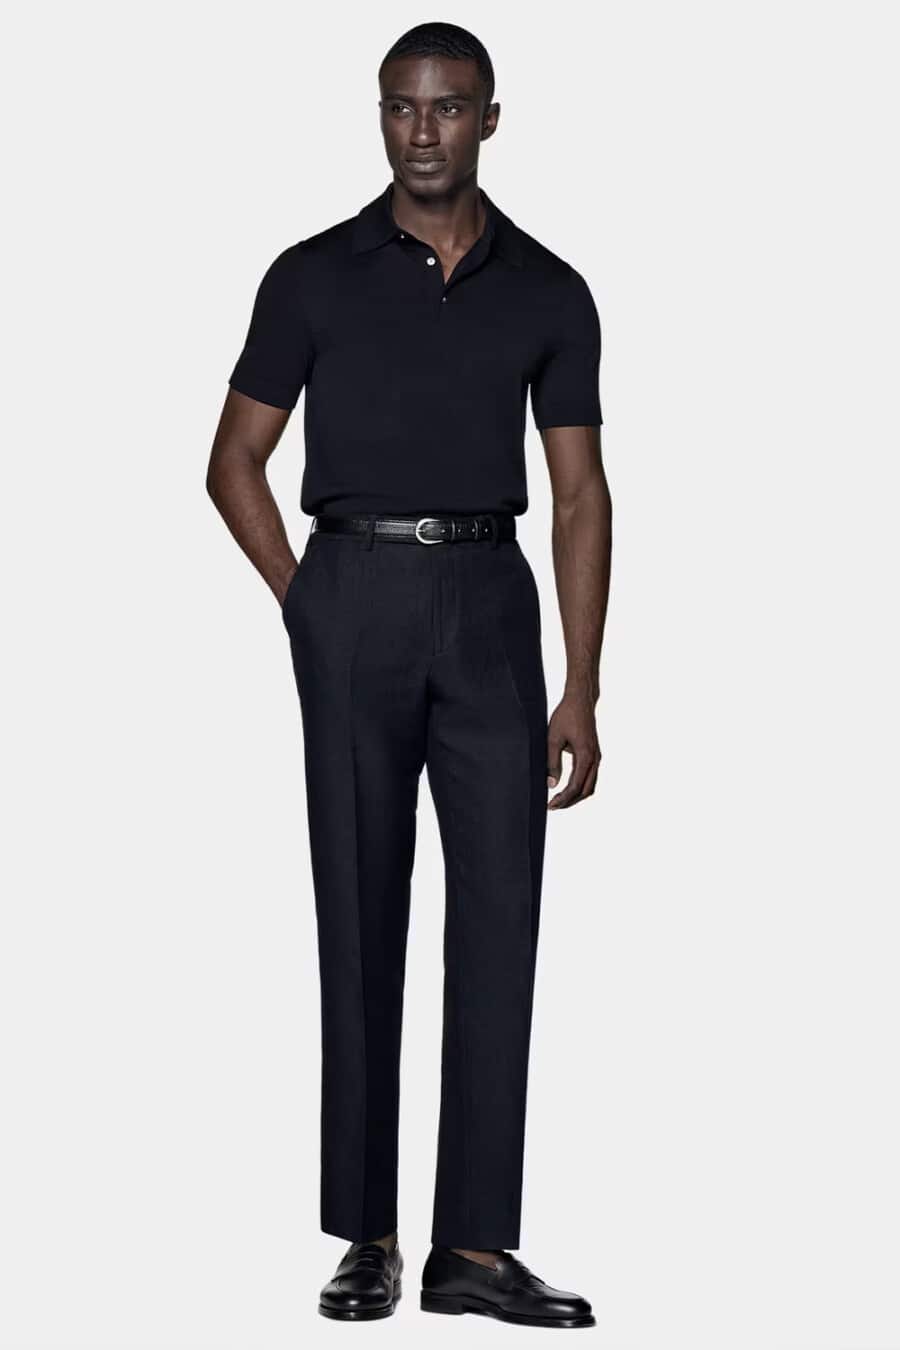 Men's black tailored pants, black tucked in polo shirt, black belt and black leather penny loafers worn sockless smart-casual outfit